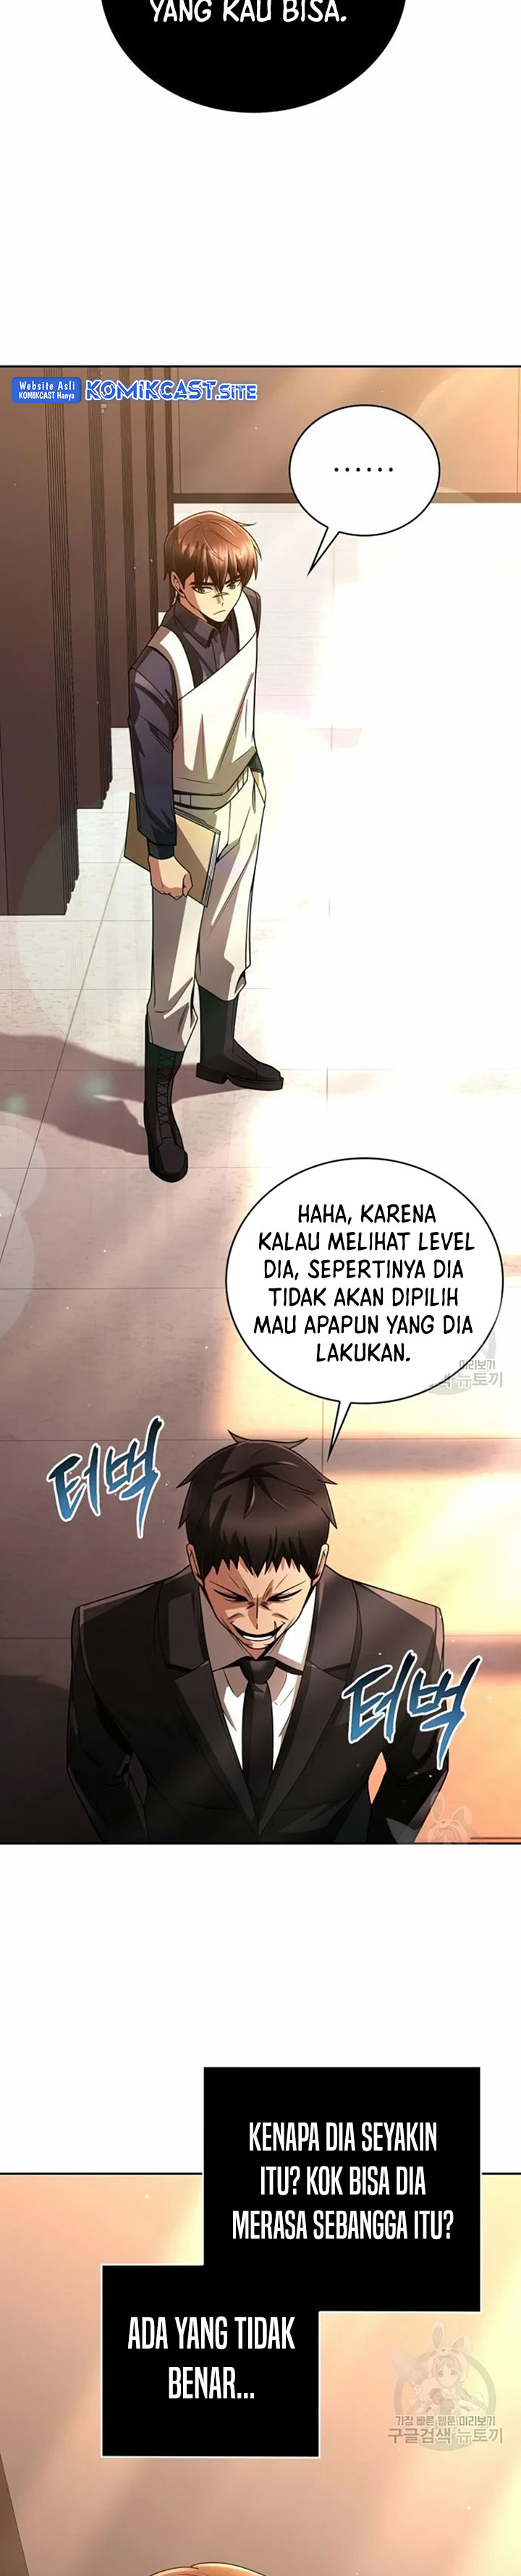 Dilarang COPAS - situs resmi www.mangacanblog.com - Komik clever cleaning life of the returned genius hunter 029 - chapter 29 30 Indonesia clever cleaning life of the returned genius hunter 029 - chapter 29 Terbaru 17|Baca Manga Komik Indonesia|Mangacan